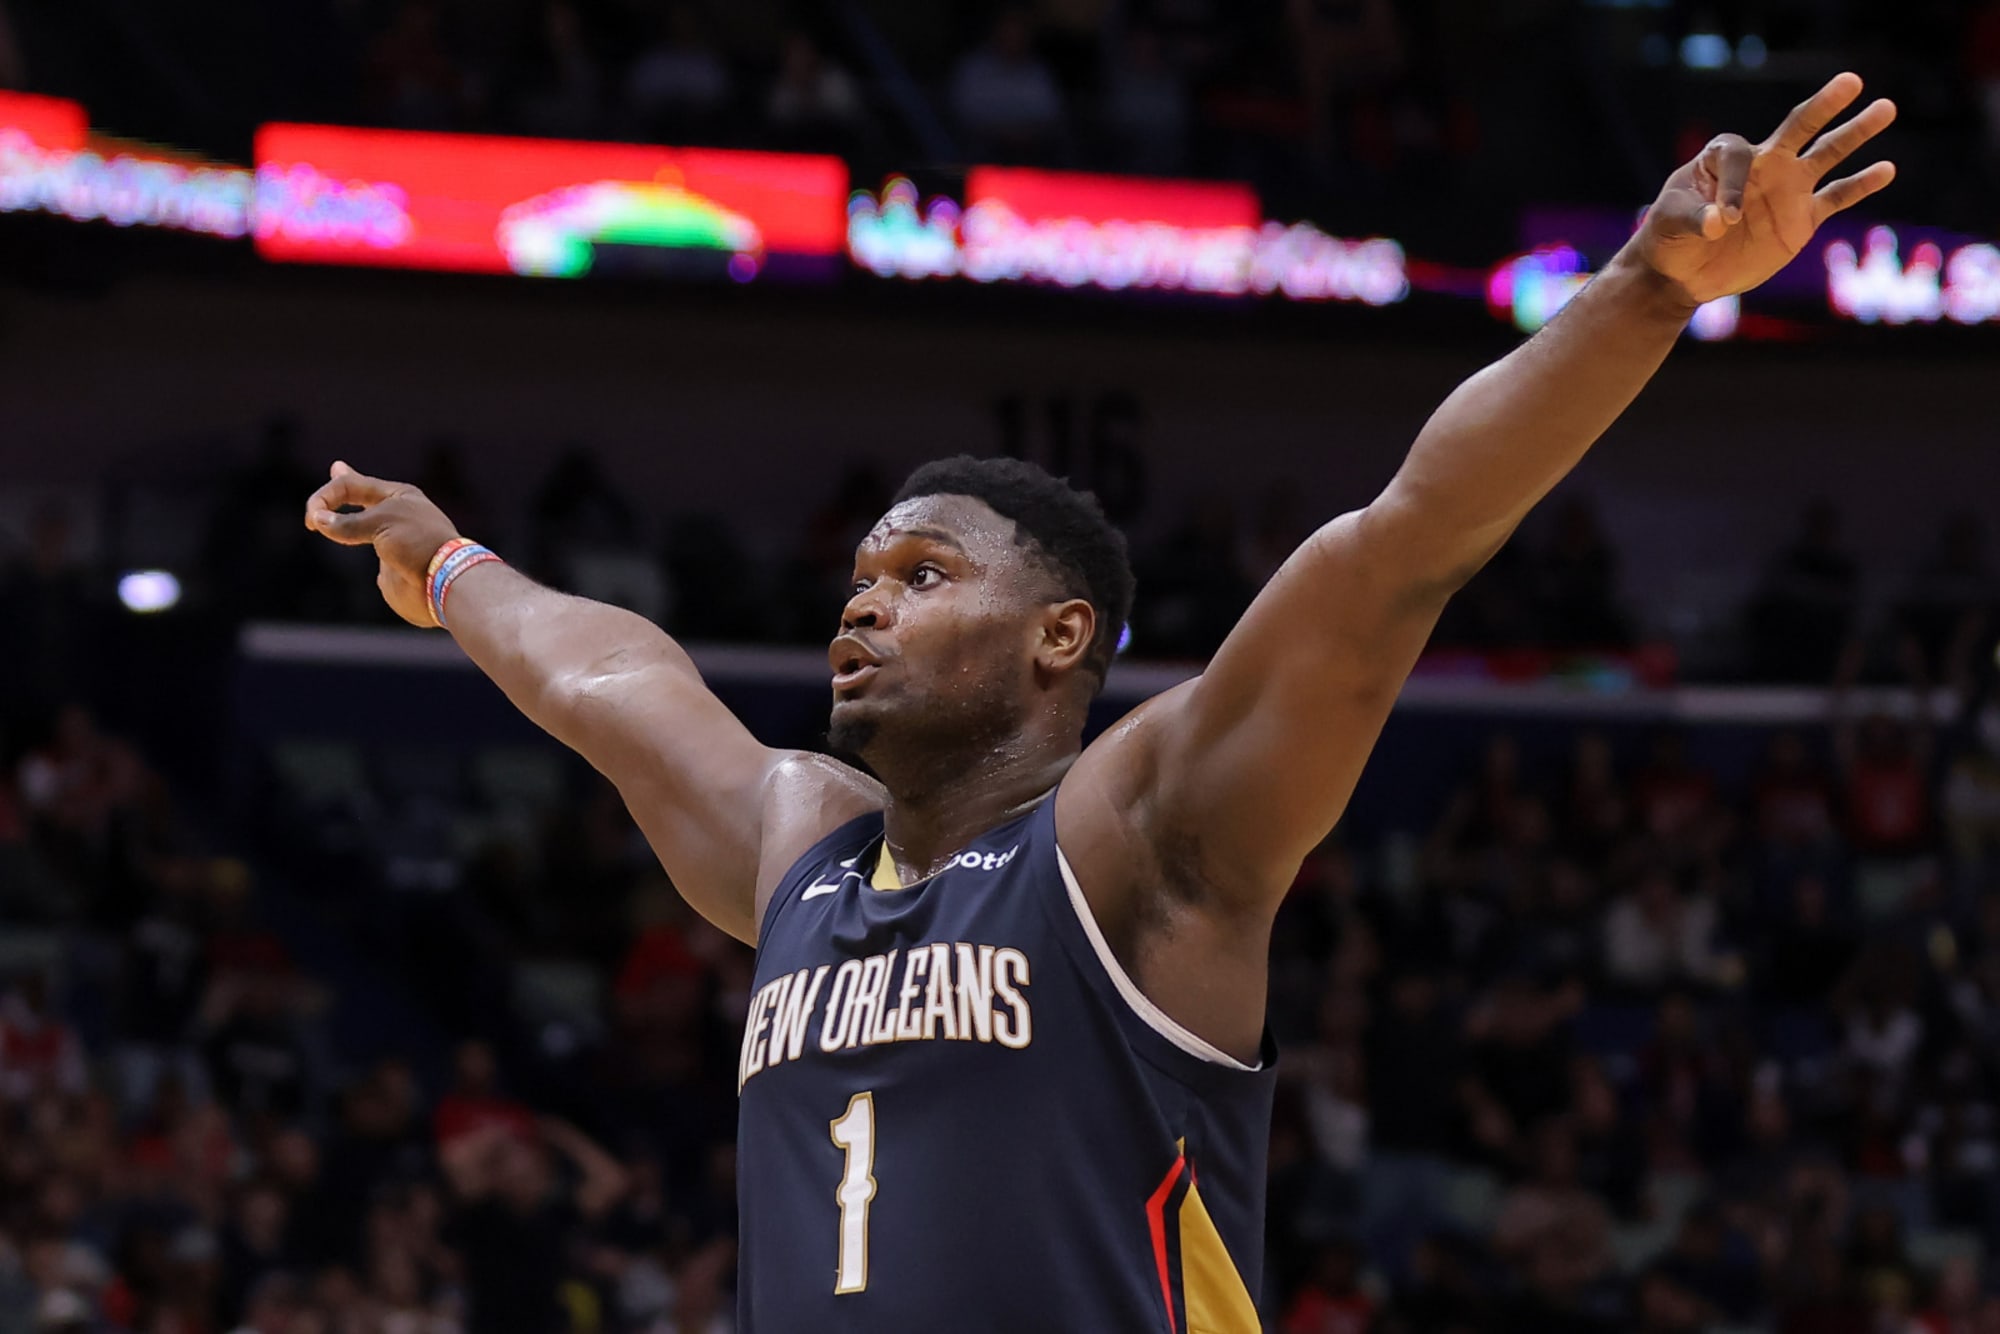 NBA News: Is Zion Williamson Playing Tonight vs Wizards? The Pelicans Star's Injury Will Only Add Fuel to the Critics' Fire